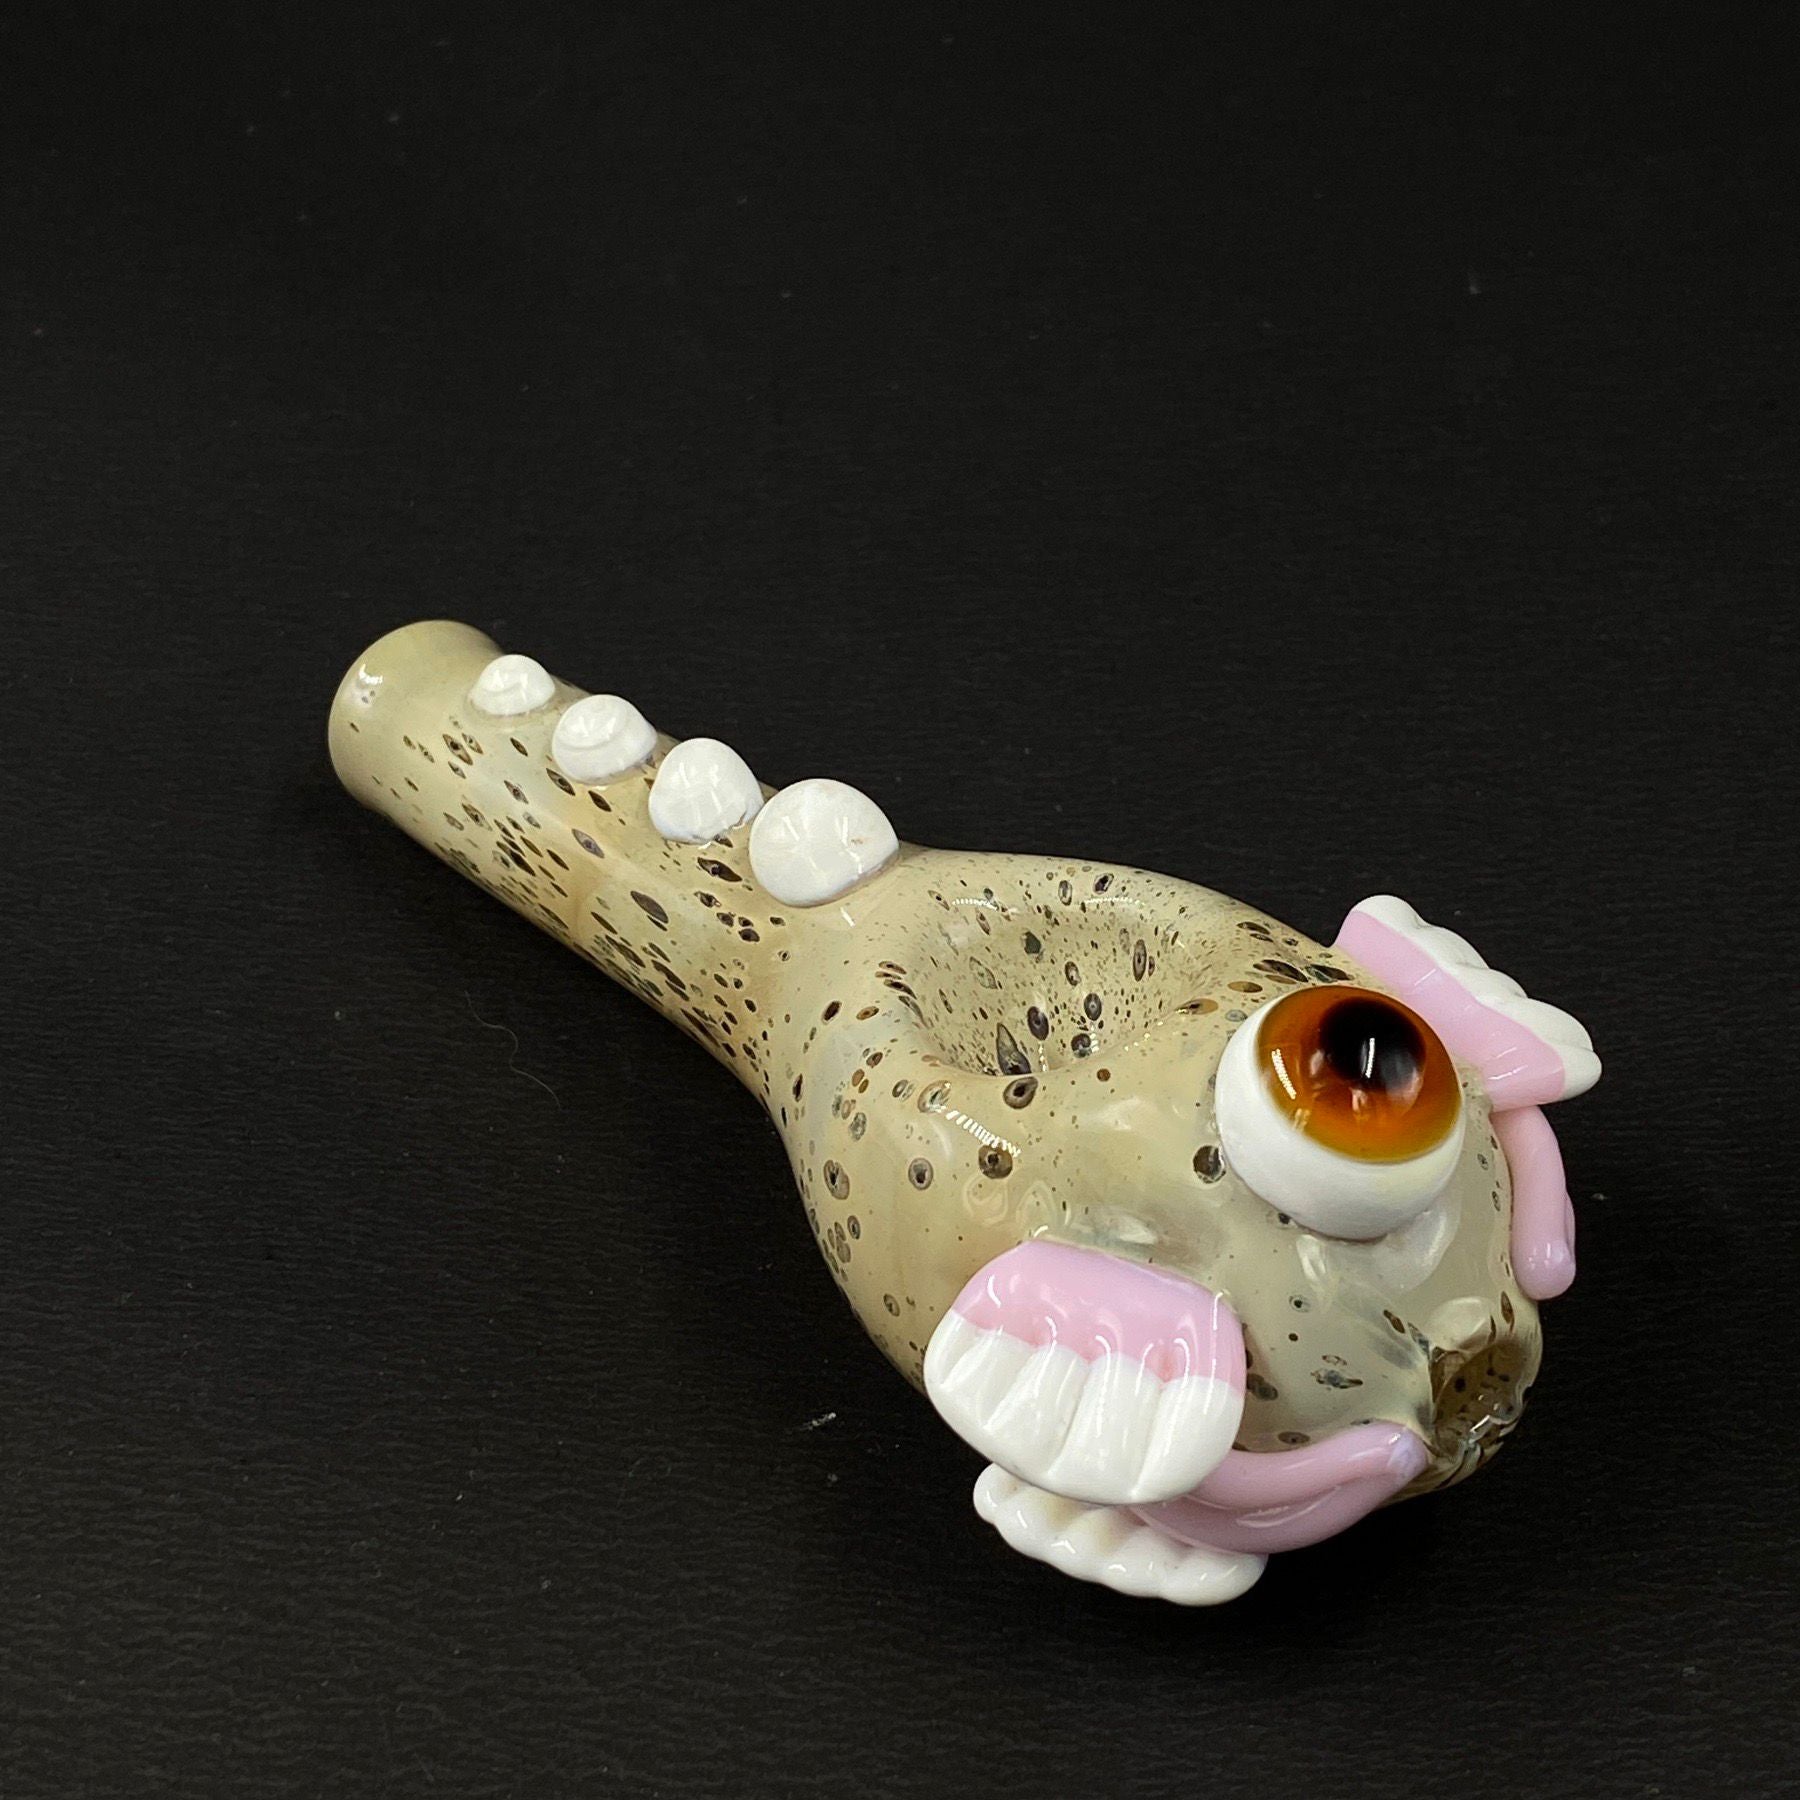 Fins and Eye Hand Pipe